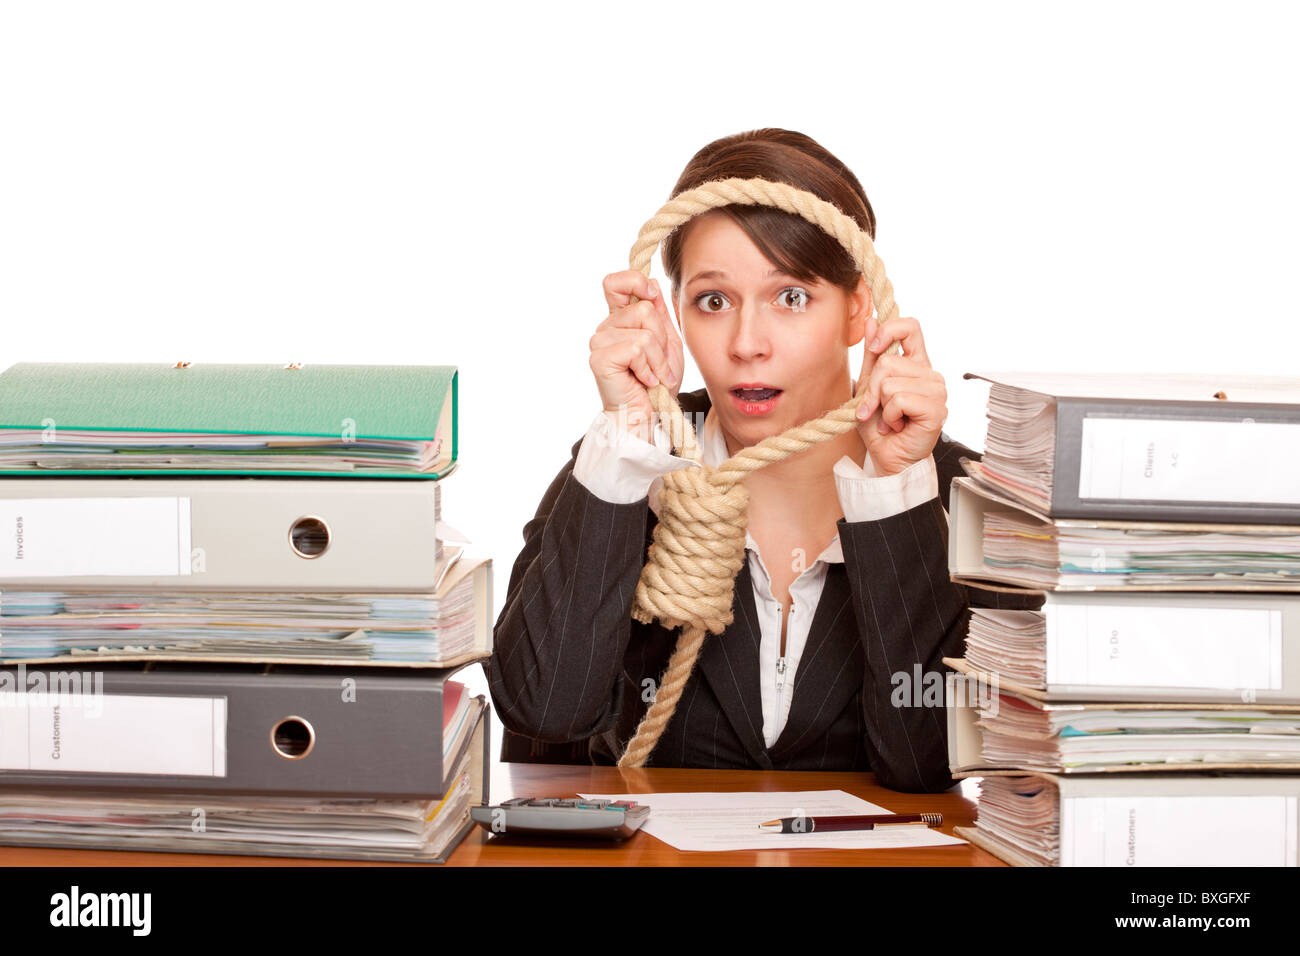 Woman in office is desperated and puts sling around head for suicide.Isolated on white background. Stock Photo